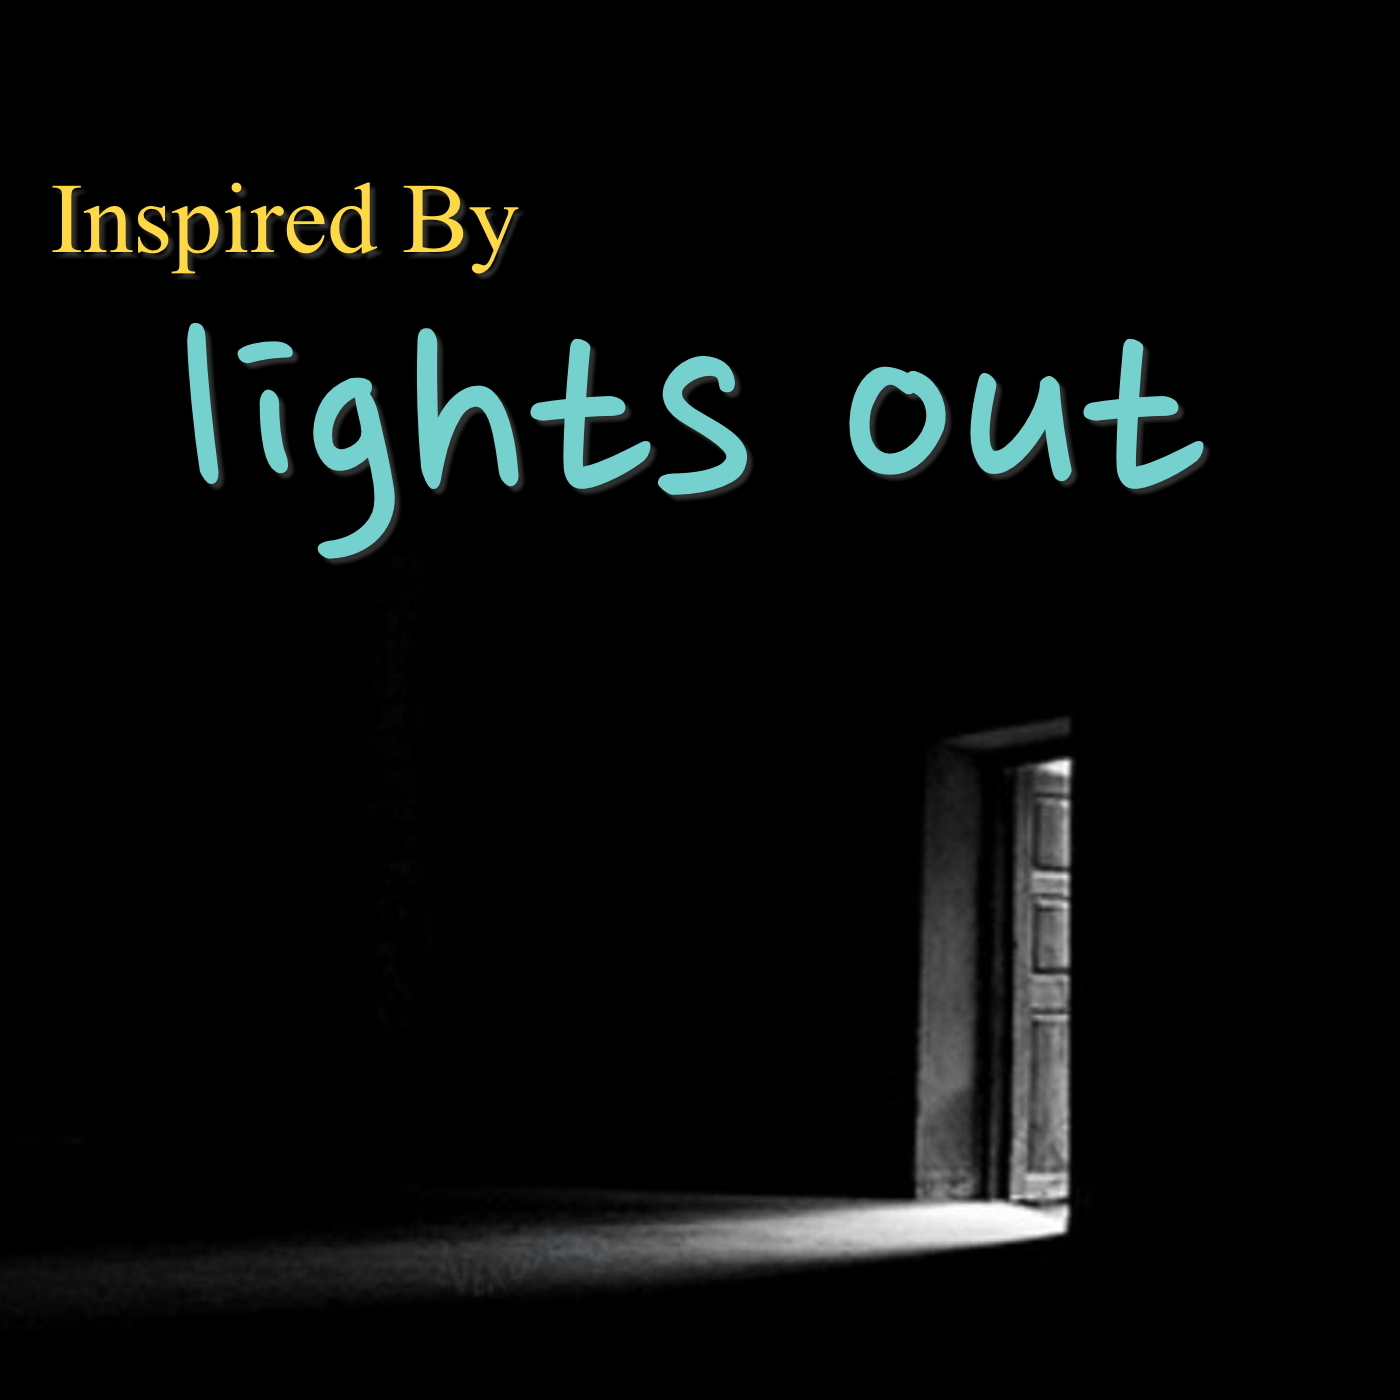 Inspired By 'Lights Out'